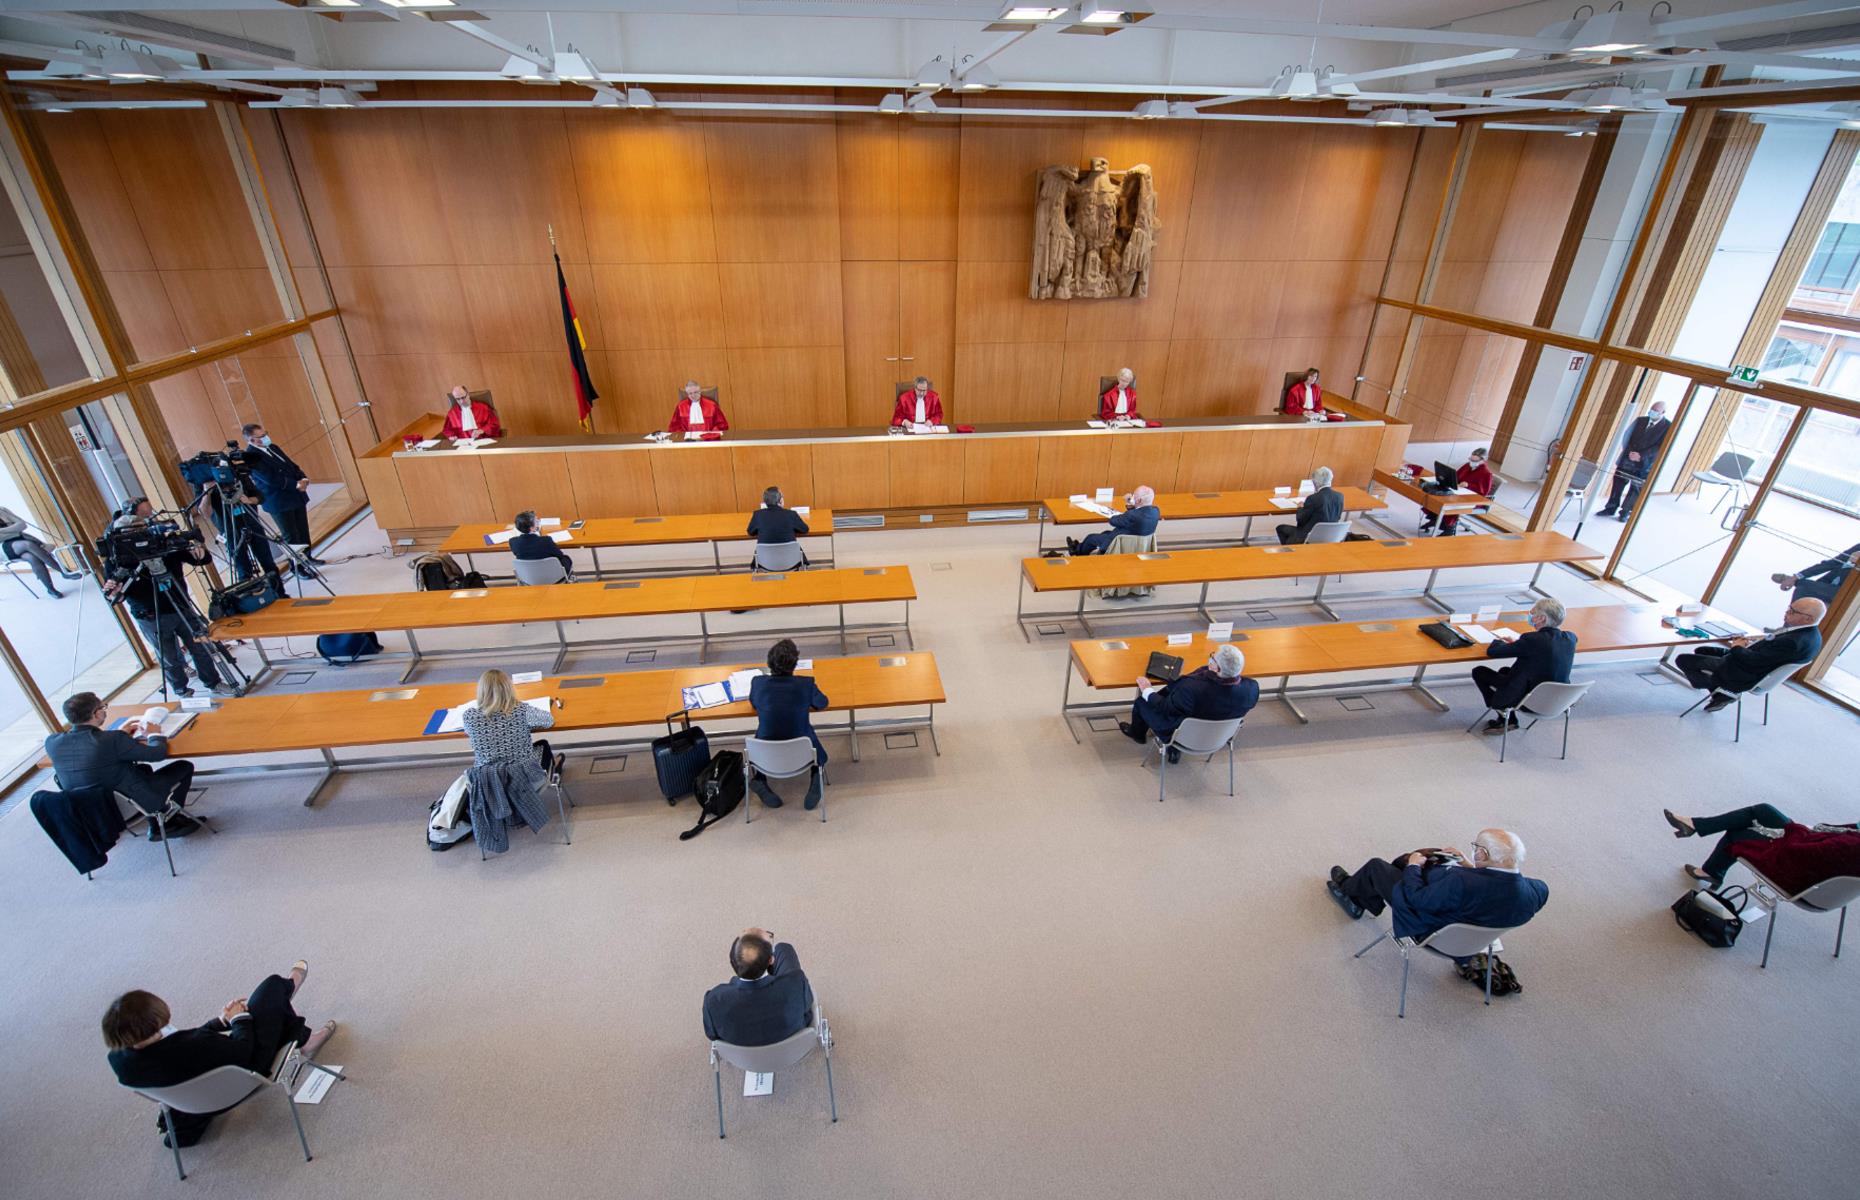 Karlsruhe, Germany: A socially-distanced court